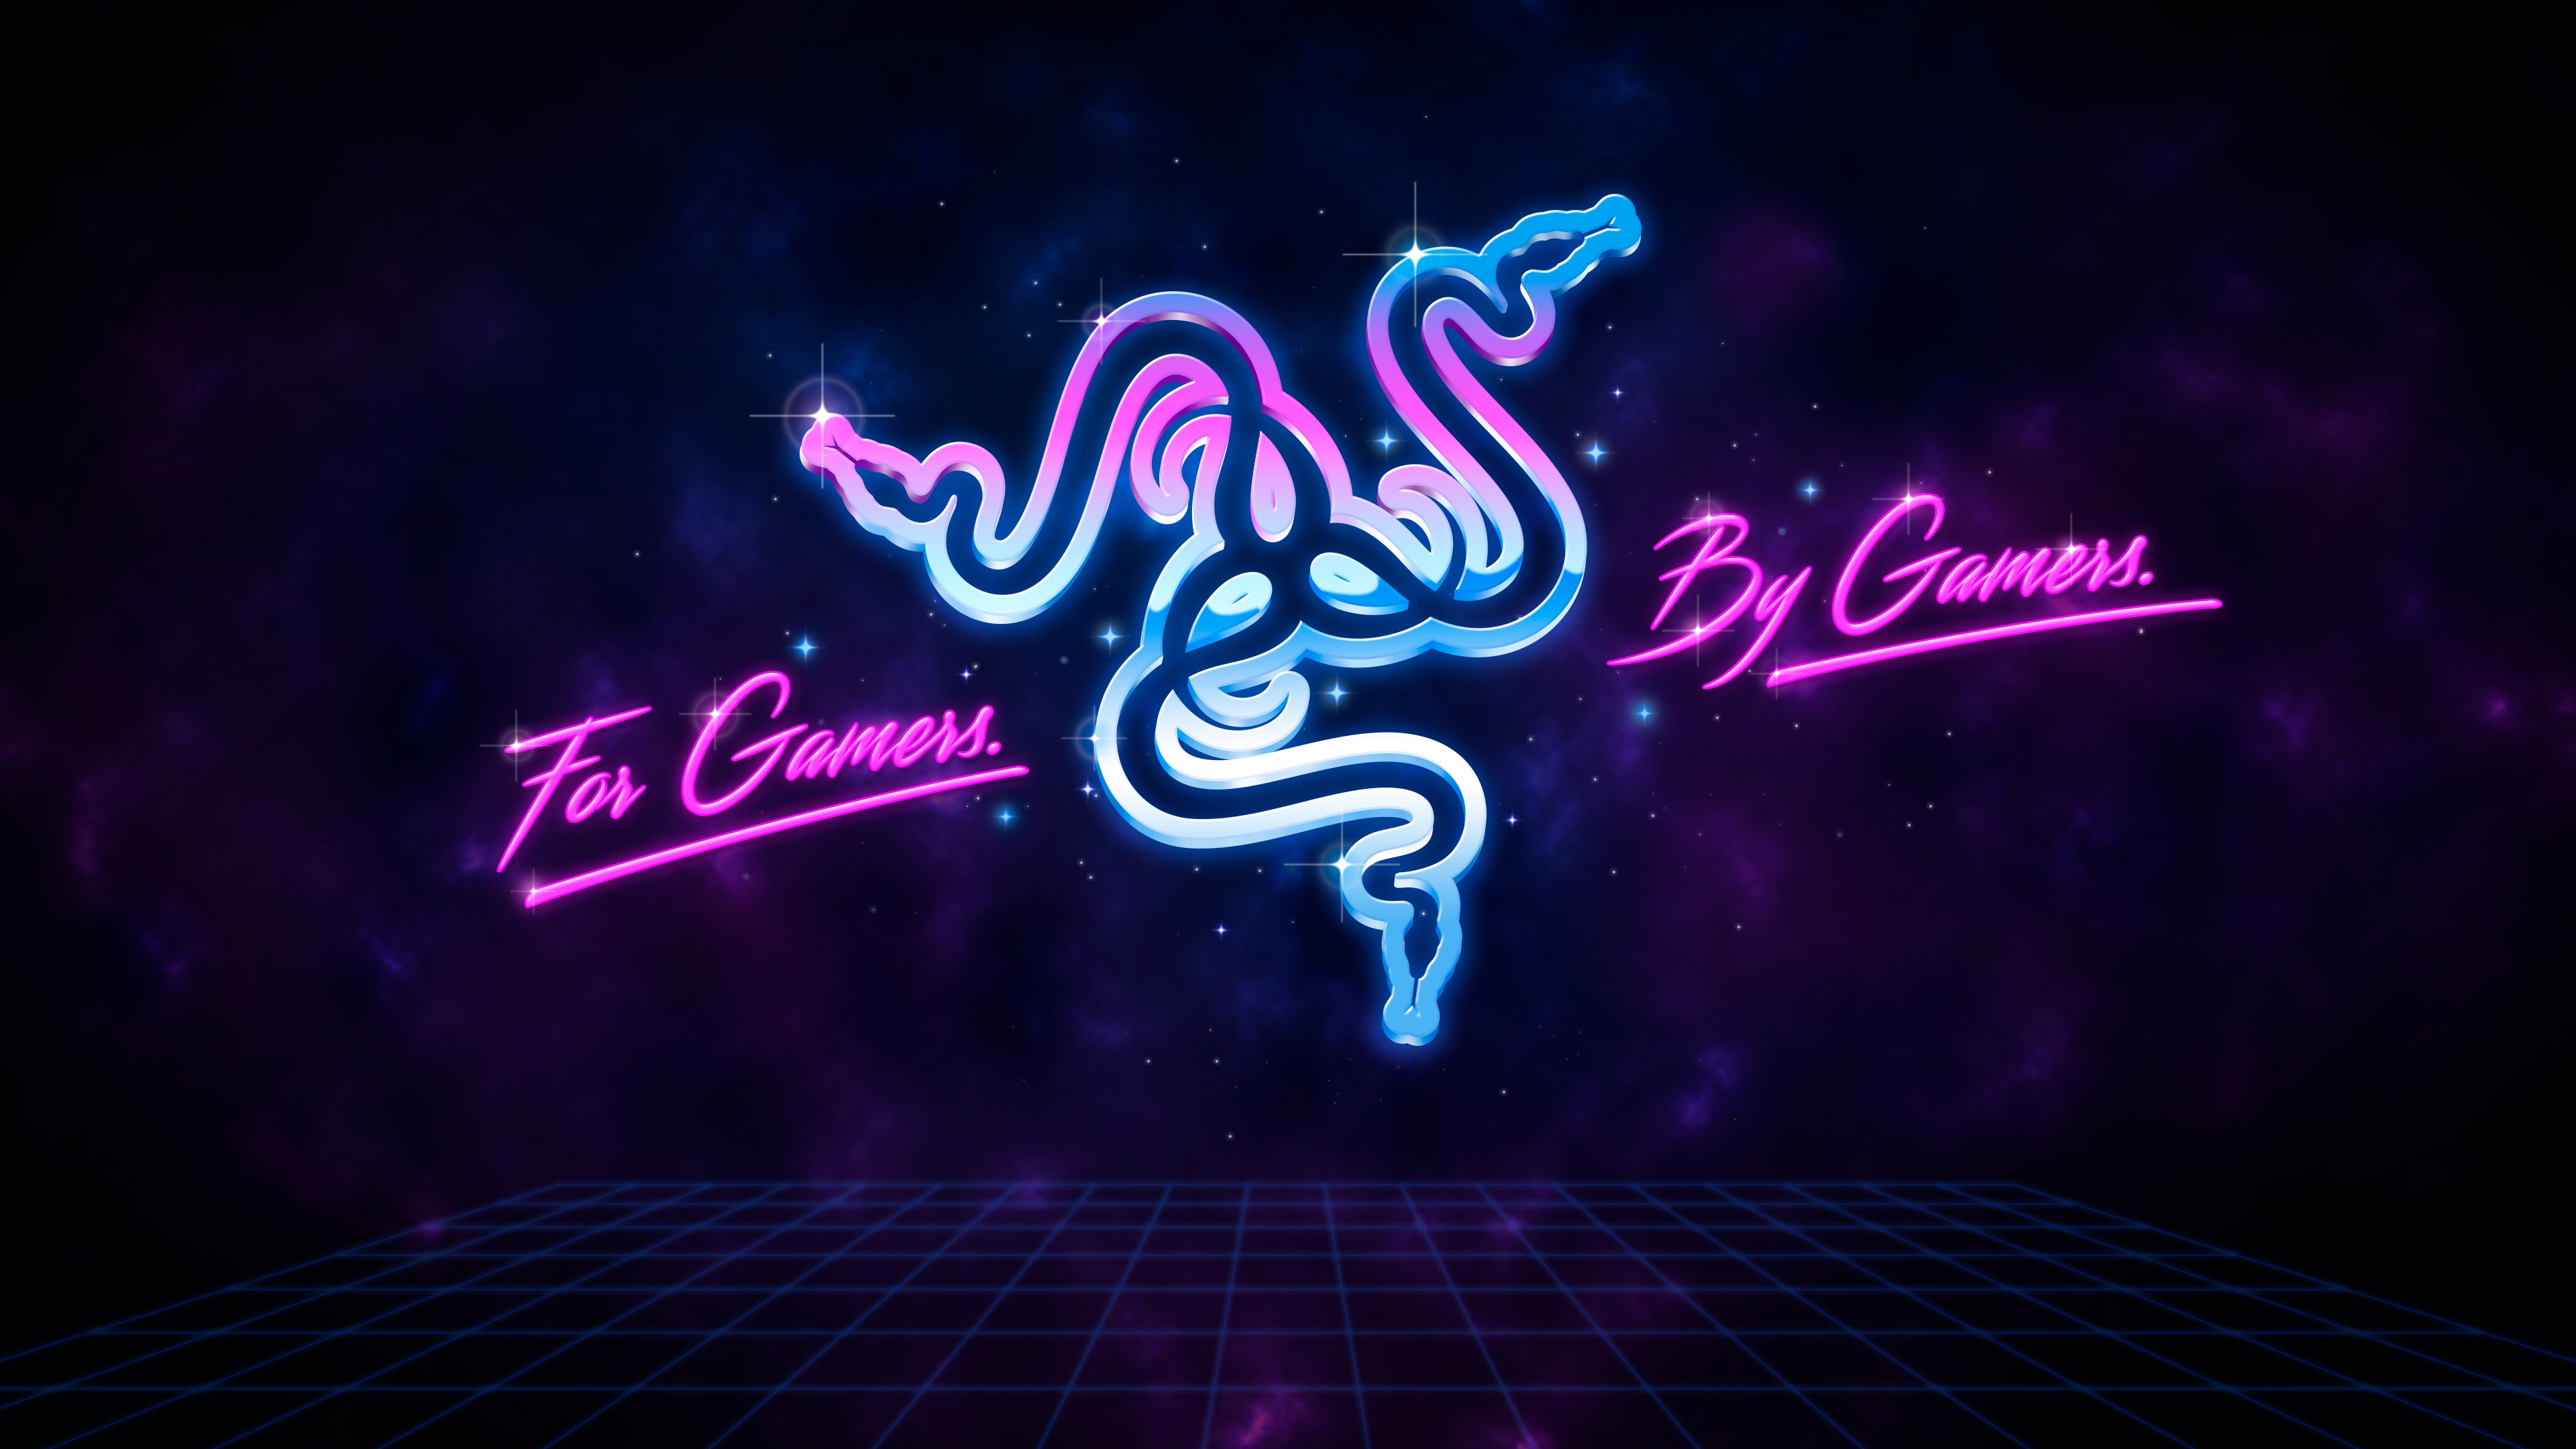 HD wallpaper, For Gamers By Gamers, Neon, Razer